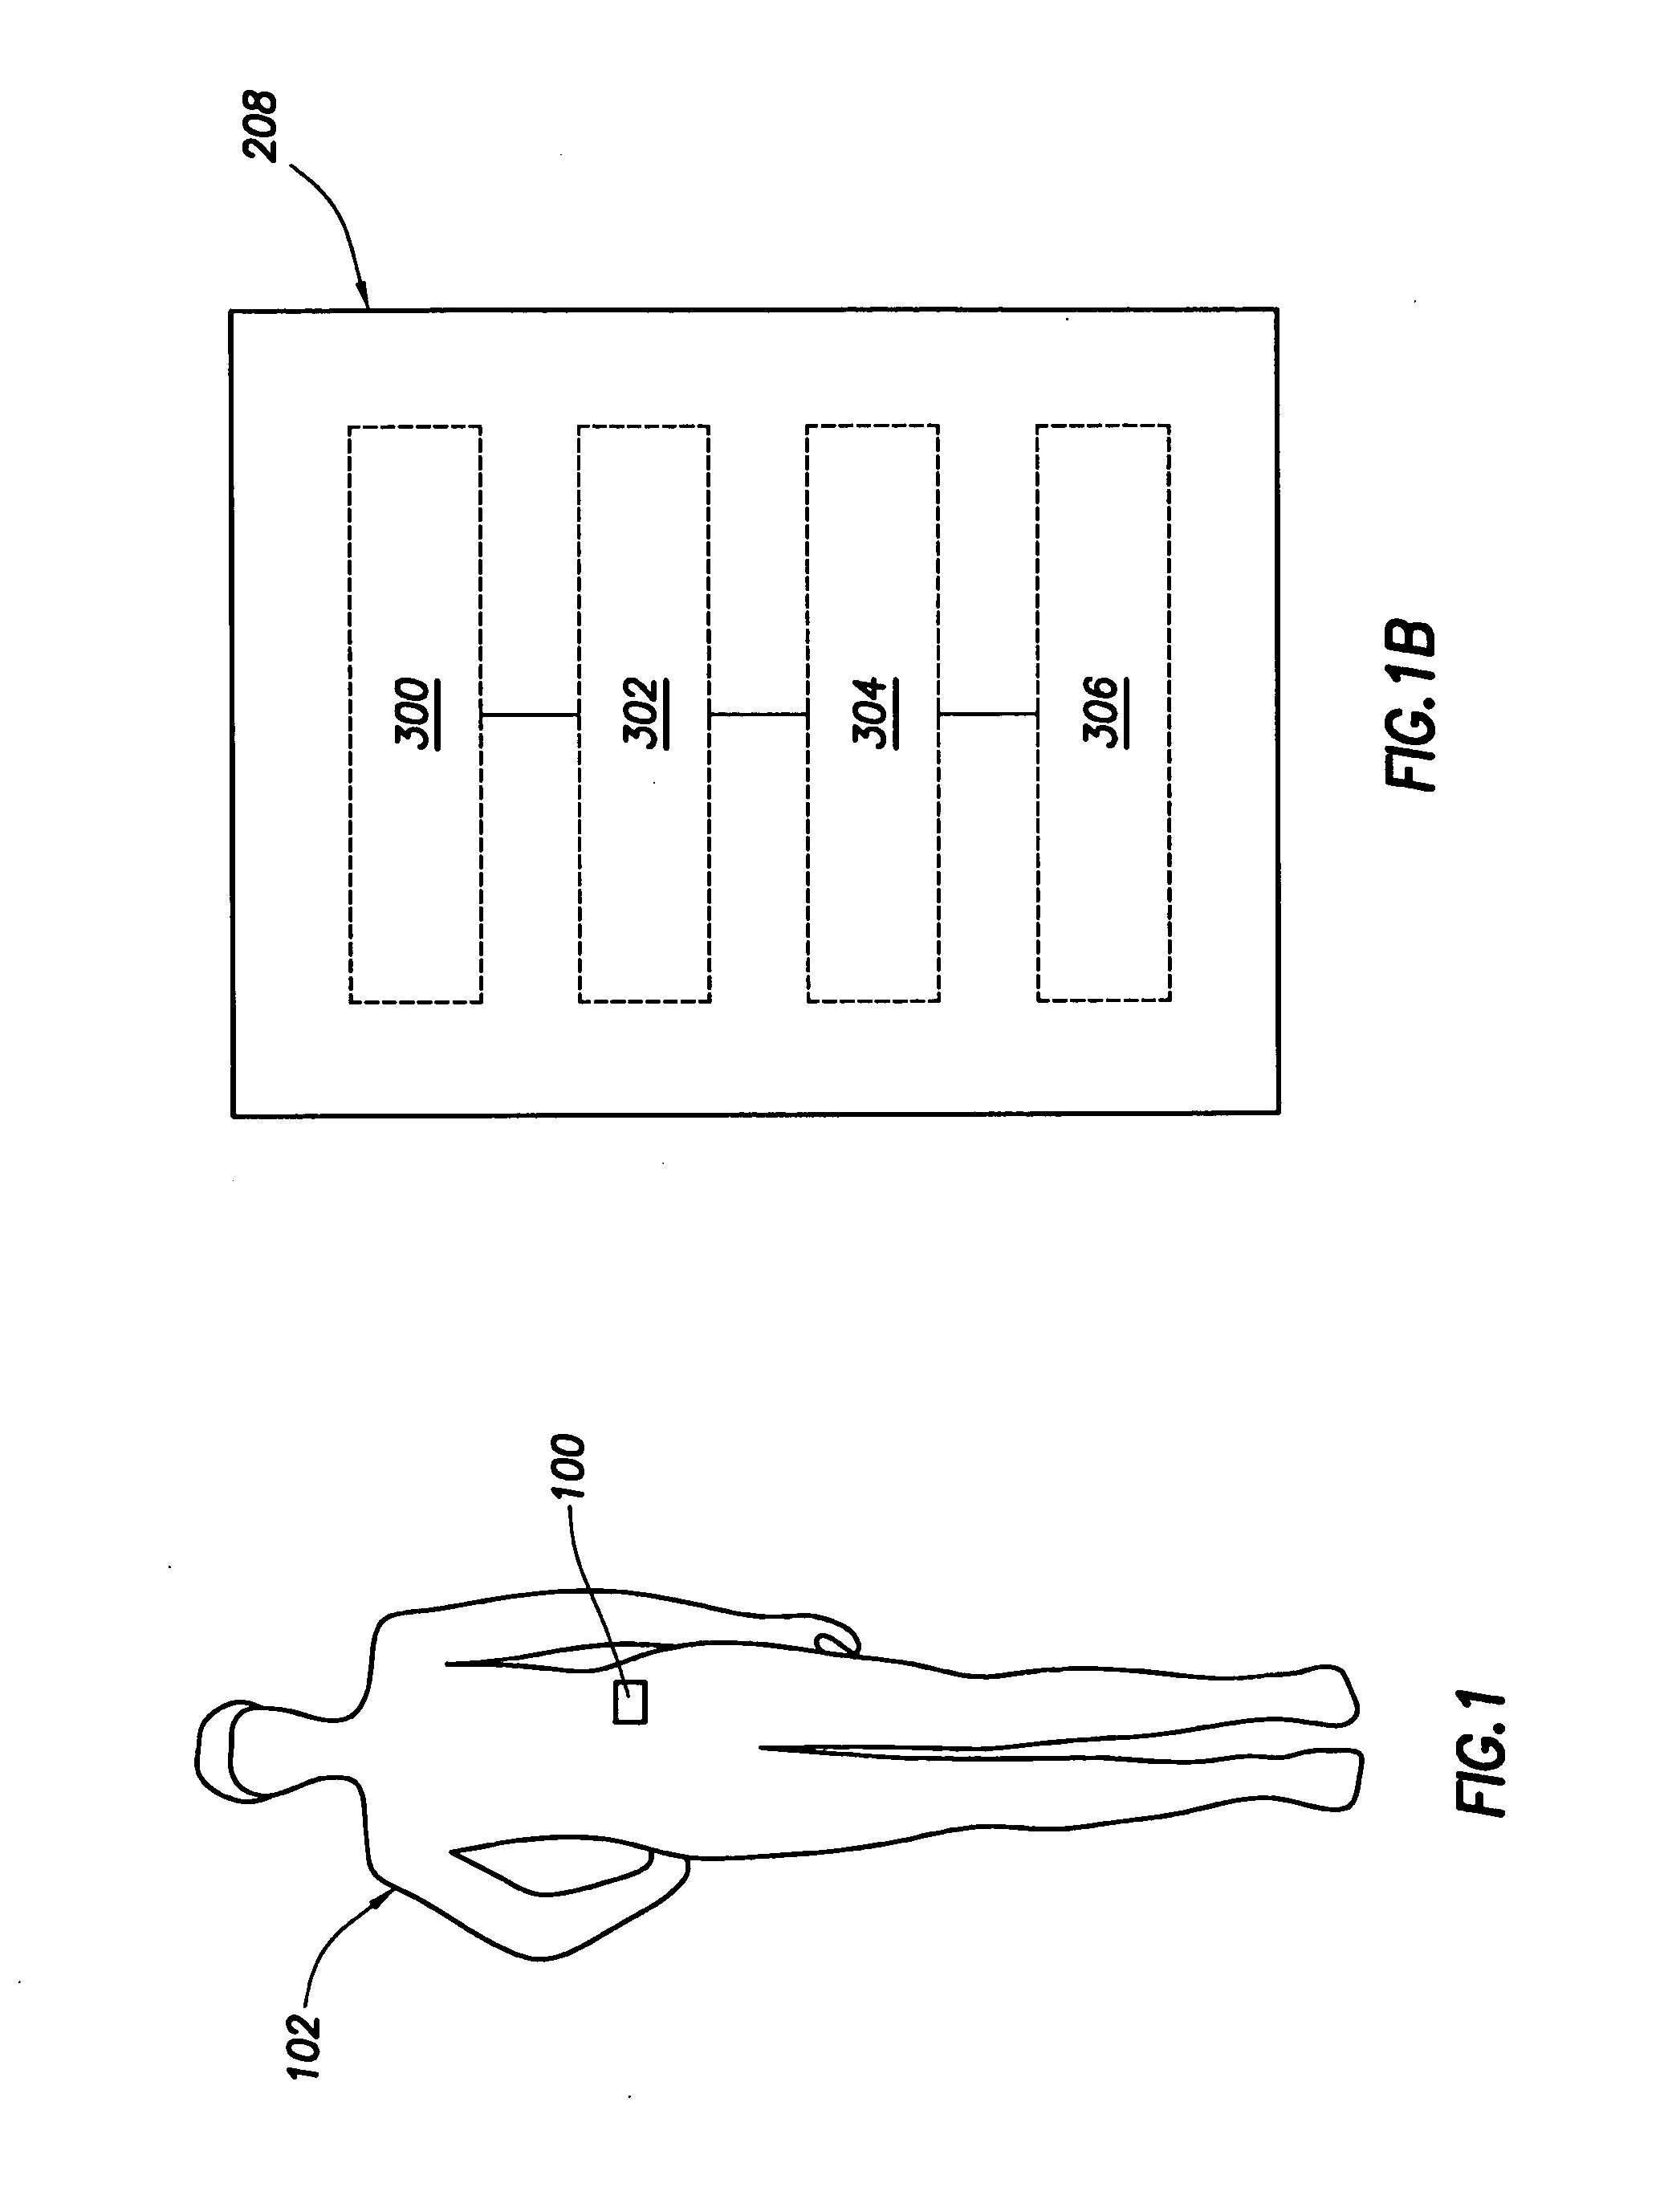 Body-Associated Receiver and Method